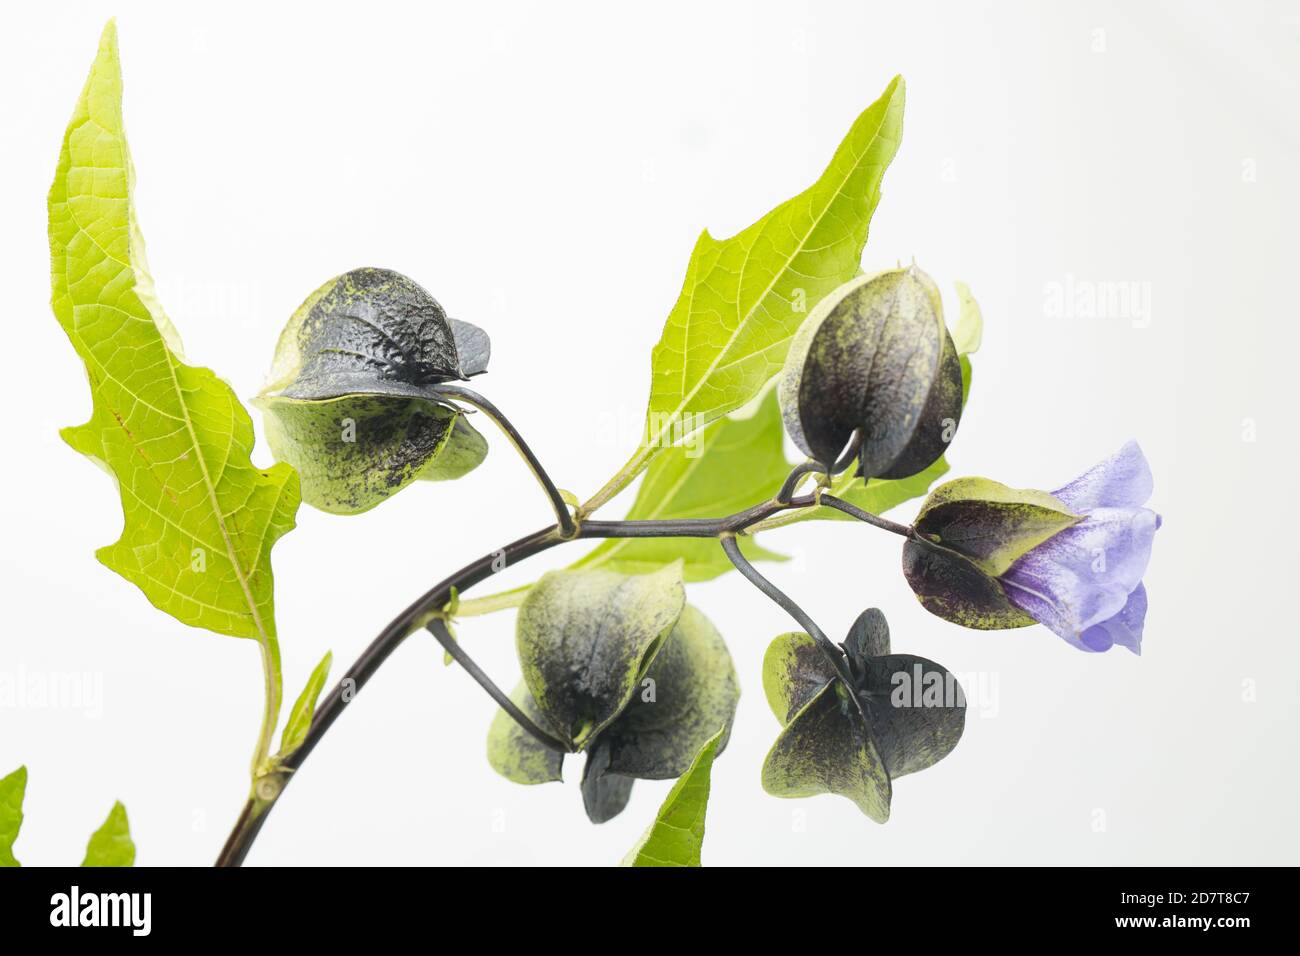 A flowering example of the Shoo-fly plant, Nicandra physalodes, that was found growing next to a road. It is native to South America. White background Stock Photo